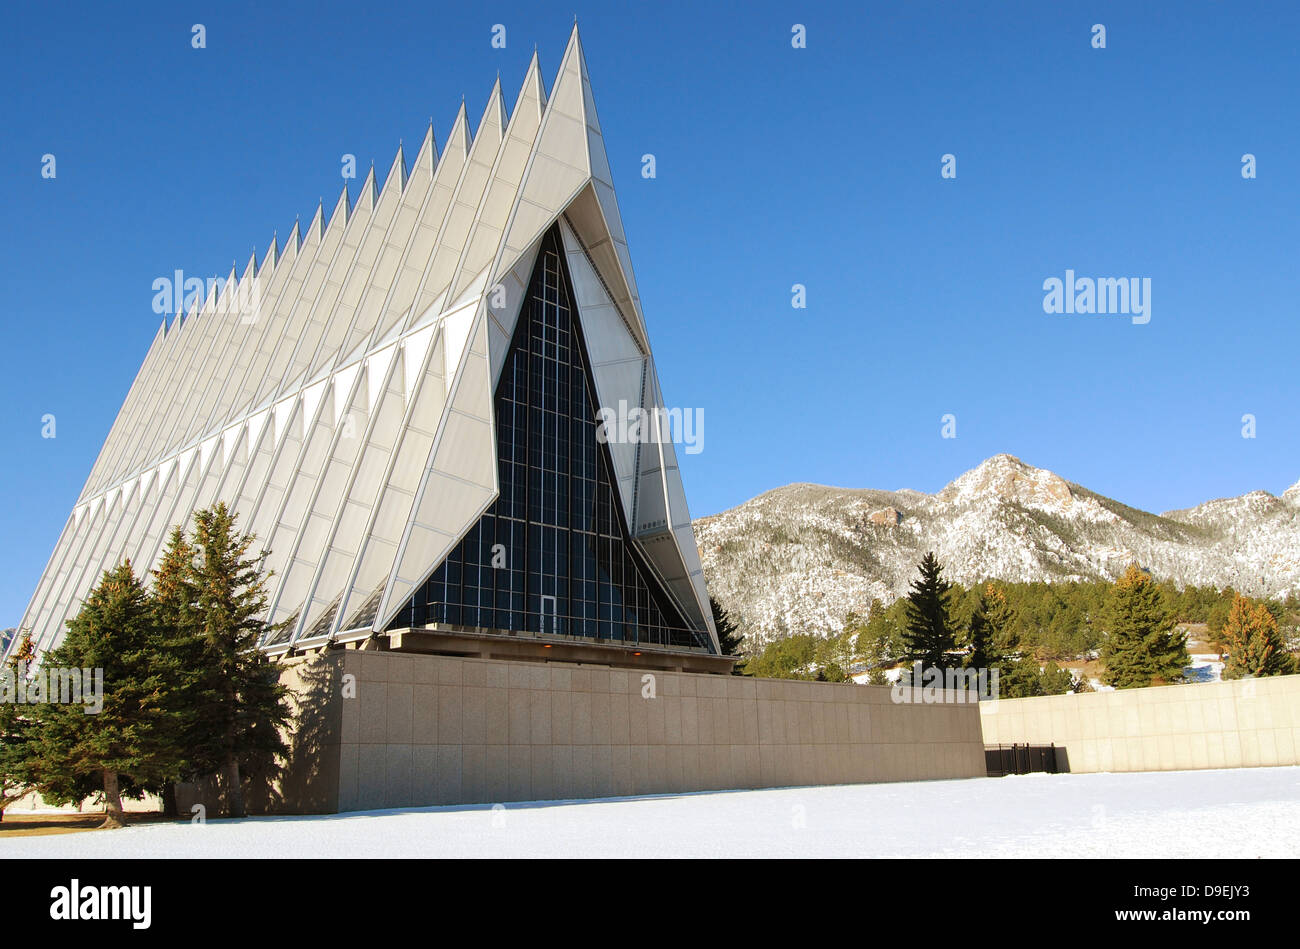 The Cadet Chapel at the U.S. Air Force Academy in Colorado Springs, Colorado. Stock Photo